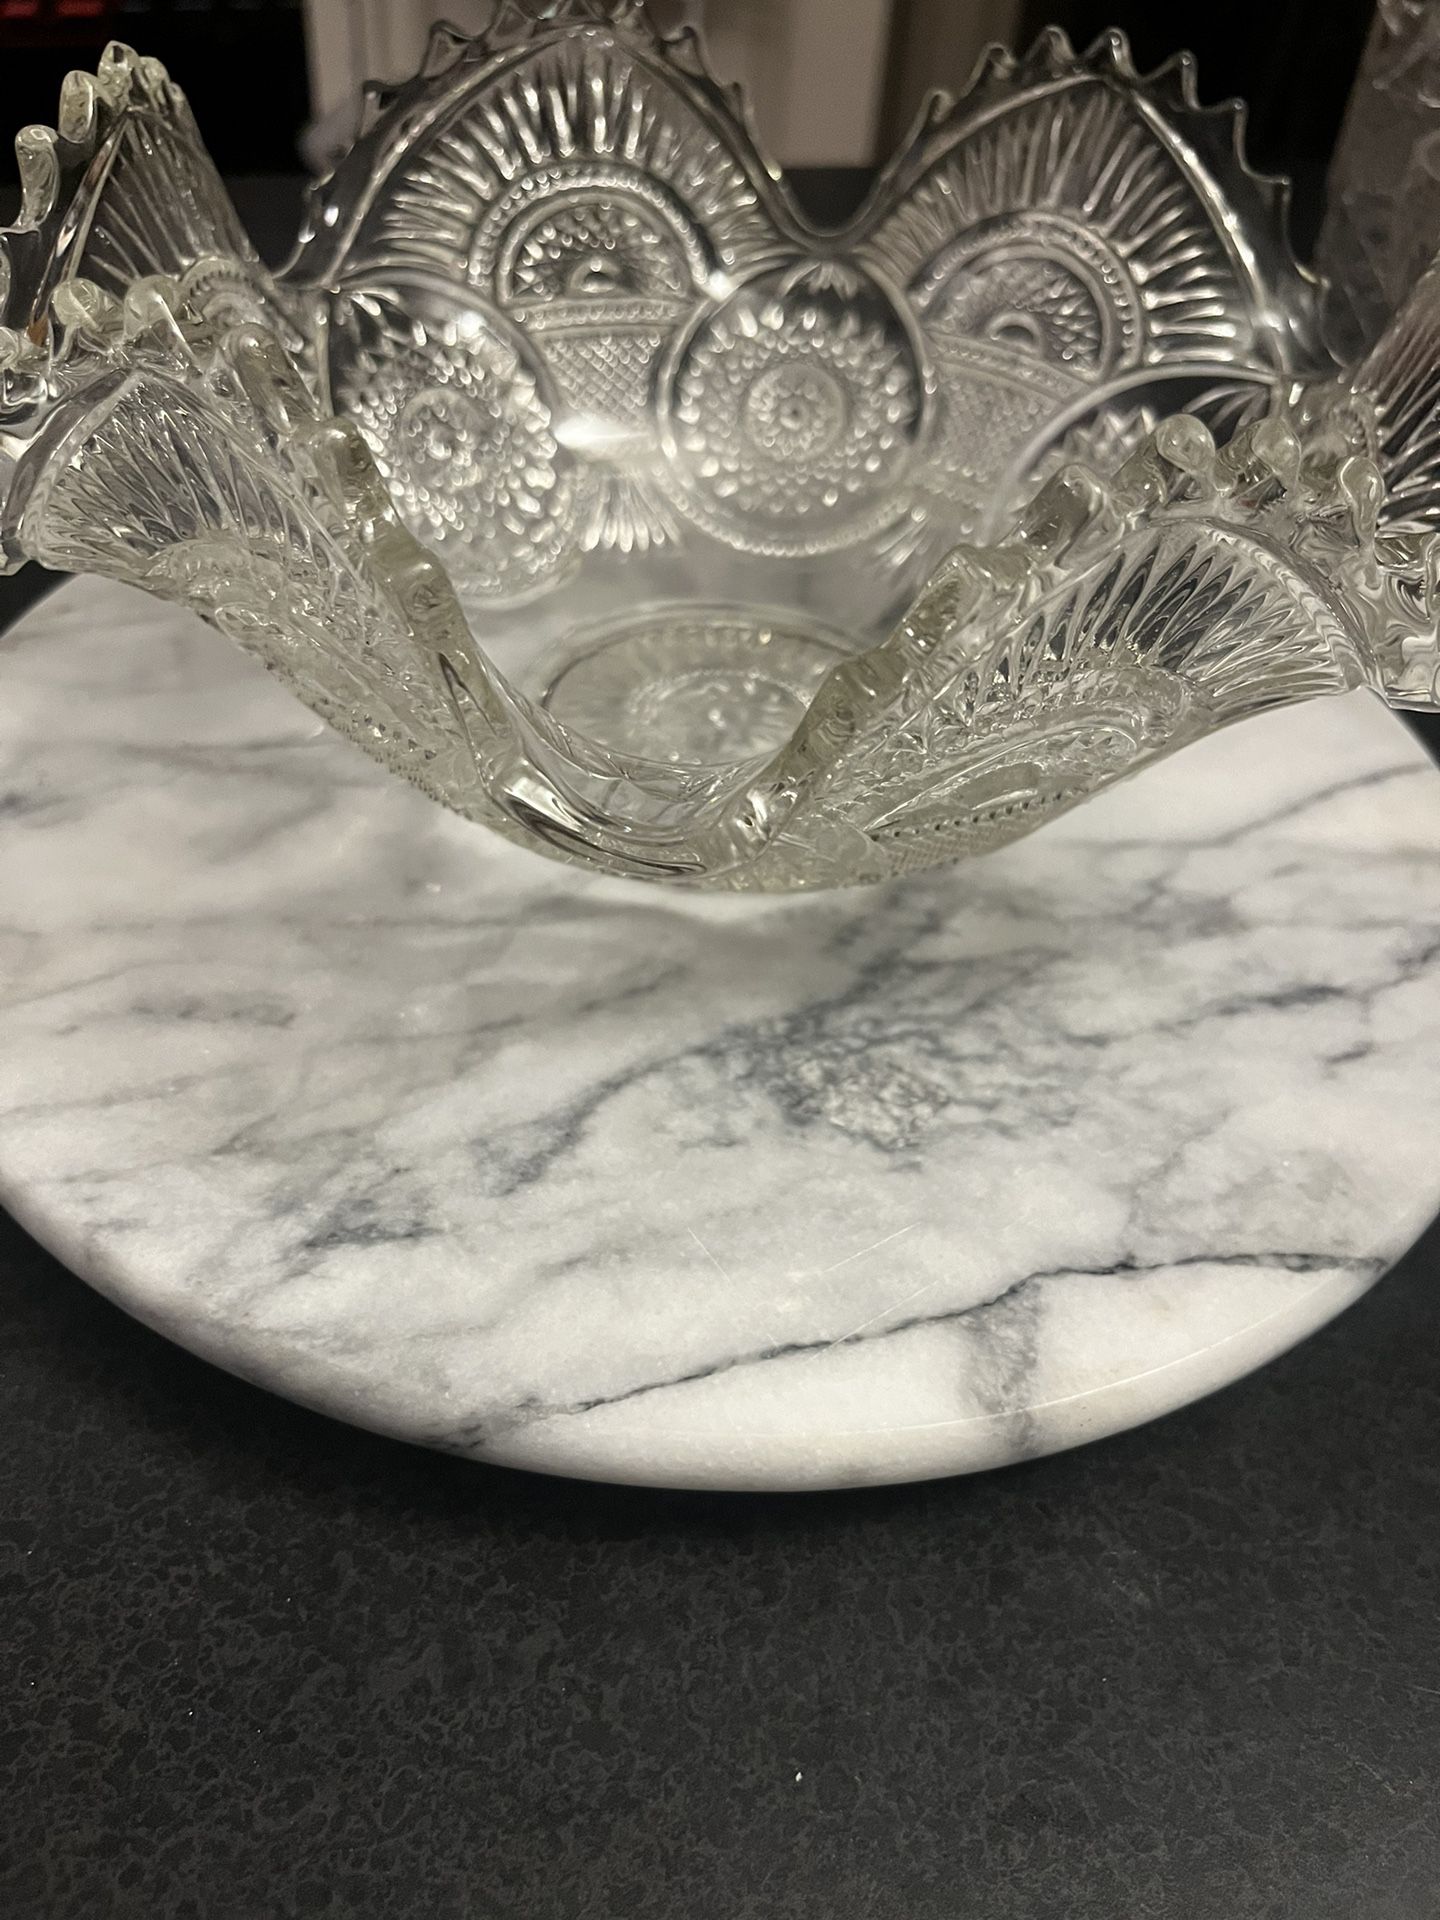 Antique Imperial Glass Serving Bowl